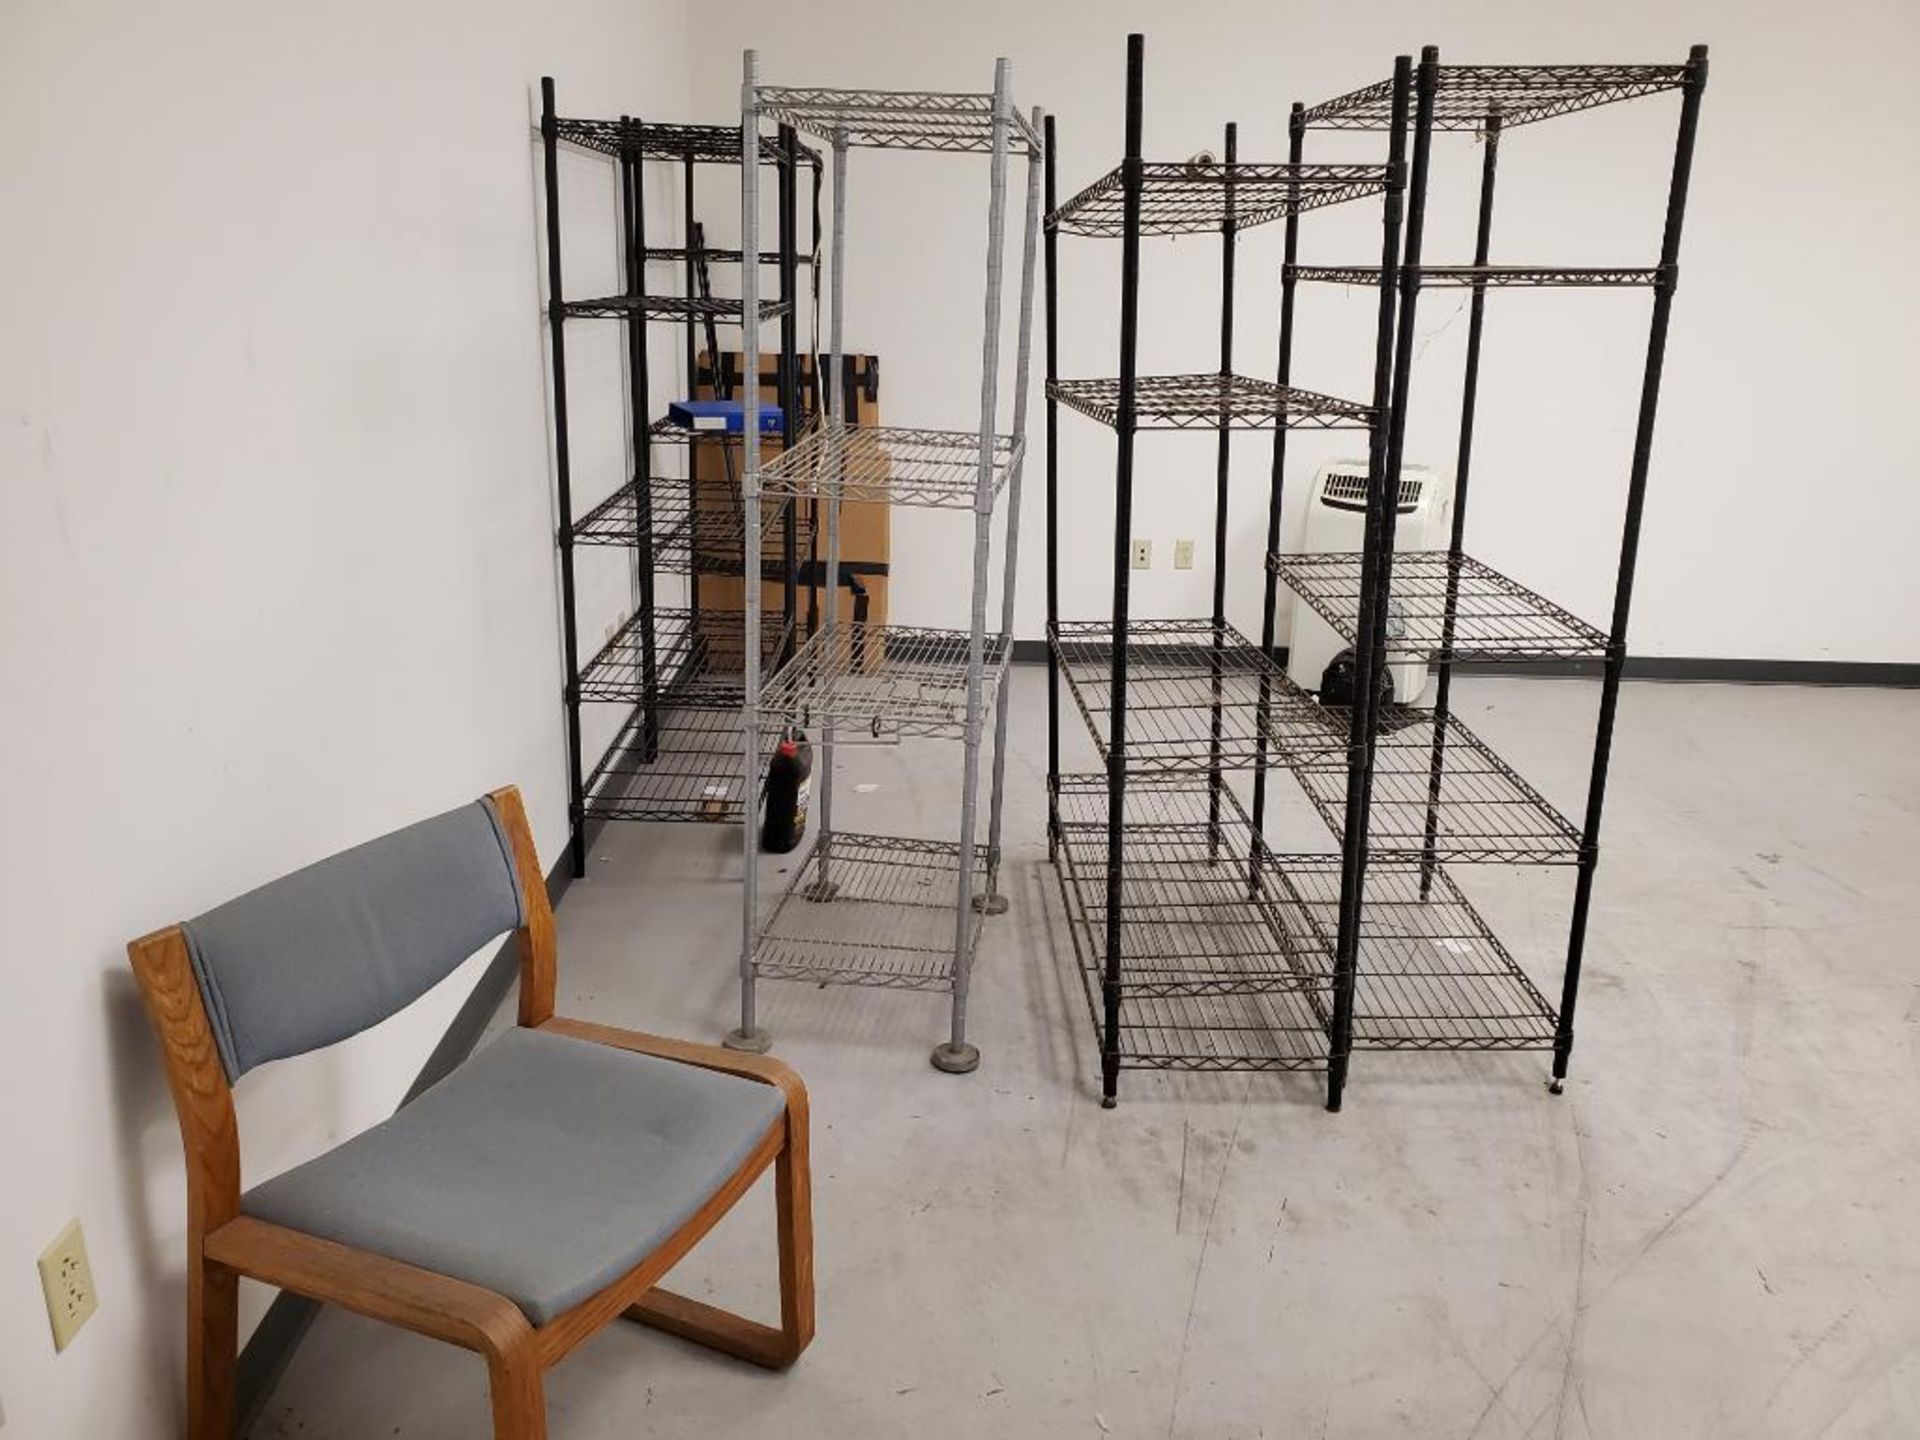 Content of Test Room: Metro Racks, Office Chairs, Wood Table, Portable A/C Unit (No Cart)